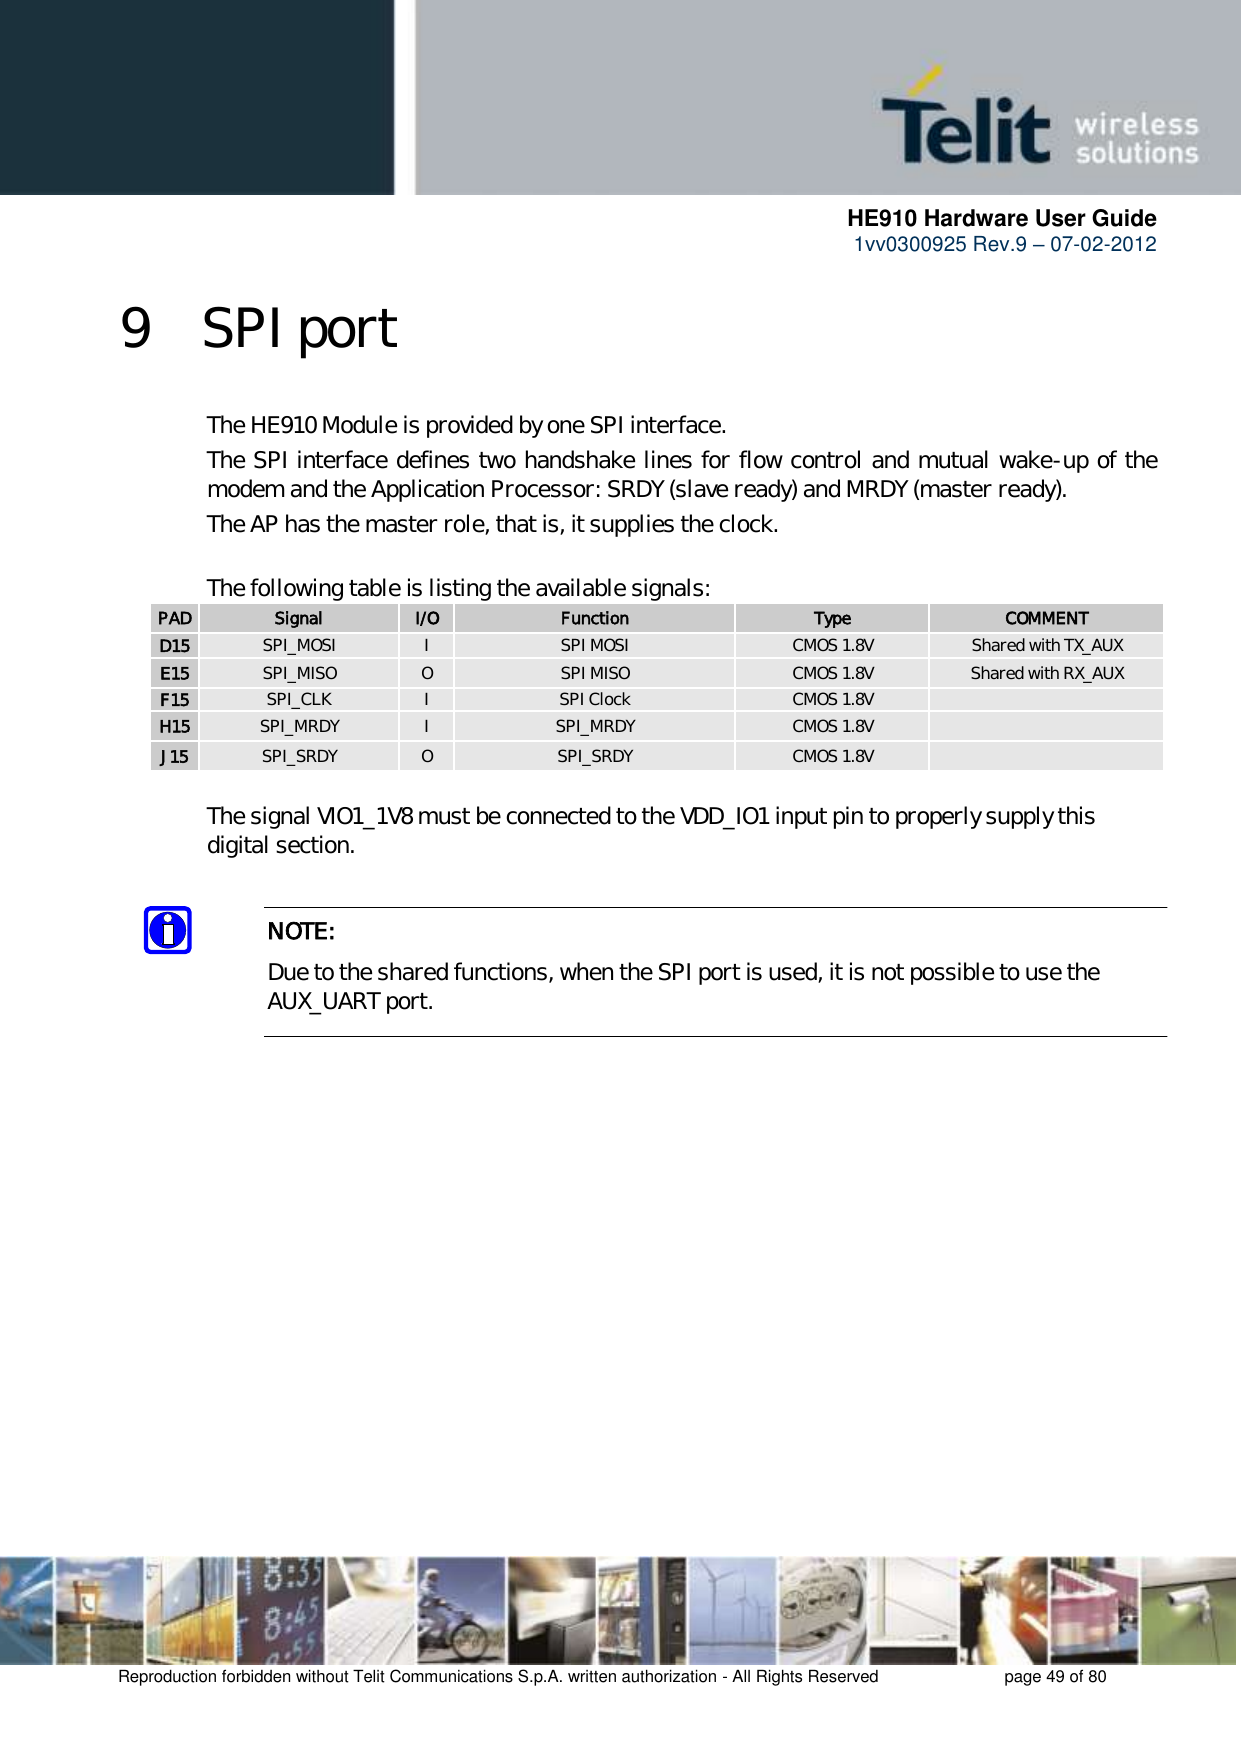      HE910 Hardware User Guide 1vv0300925 Rev.9 – 07-02-2012    Reproduction forbidden without Telit Communications S.p.A. written authorization - All Rights Reserved    page 49 of 80  9 SPI port   The HE910 Module is provided by one SPI interface.     The SPI interface defines two handshake lines for flow control and mutual wake-up of the   modem and the Application Processor: SRDY (slave ready) and MRDY (master ready).   The AP has the master role, that is, it supplies the clock.    The following table is listing the available signals: PAD Signal I/O Function Type COMMENT D15 SPI_MOSI I SPI MOSI CMOS 1.8V Shared with TX_AUX E15 SPI_MISO O SPI MISO CMOS 1.8V Shared with RX_AUX F15 SPI_CLK I SPI Clock CMOS 1.8V  H15 SPI_MRDY I SPI_MRDY CMOS 1.8V  J15 SPI_SRDY O SPI_SRDY CMOS 1.8V   The signal VIO1_1V8 must be connected to the VDD_IO1 input pin to properly supply this digital section.   NOTE:  Due to the shared functions, when the SPI port is used, it is not possible to use the AUX_UART port. 